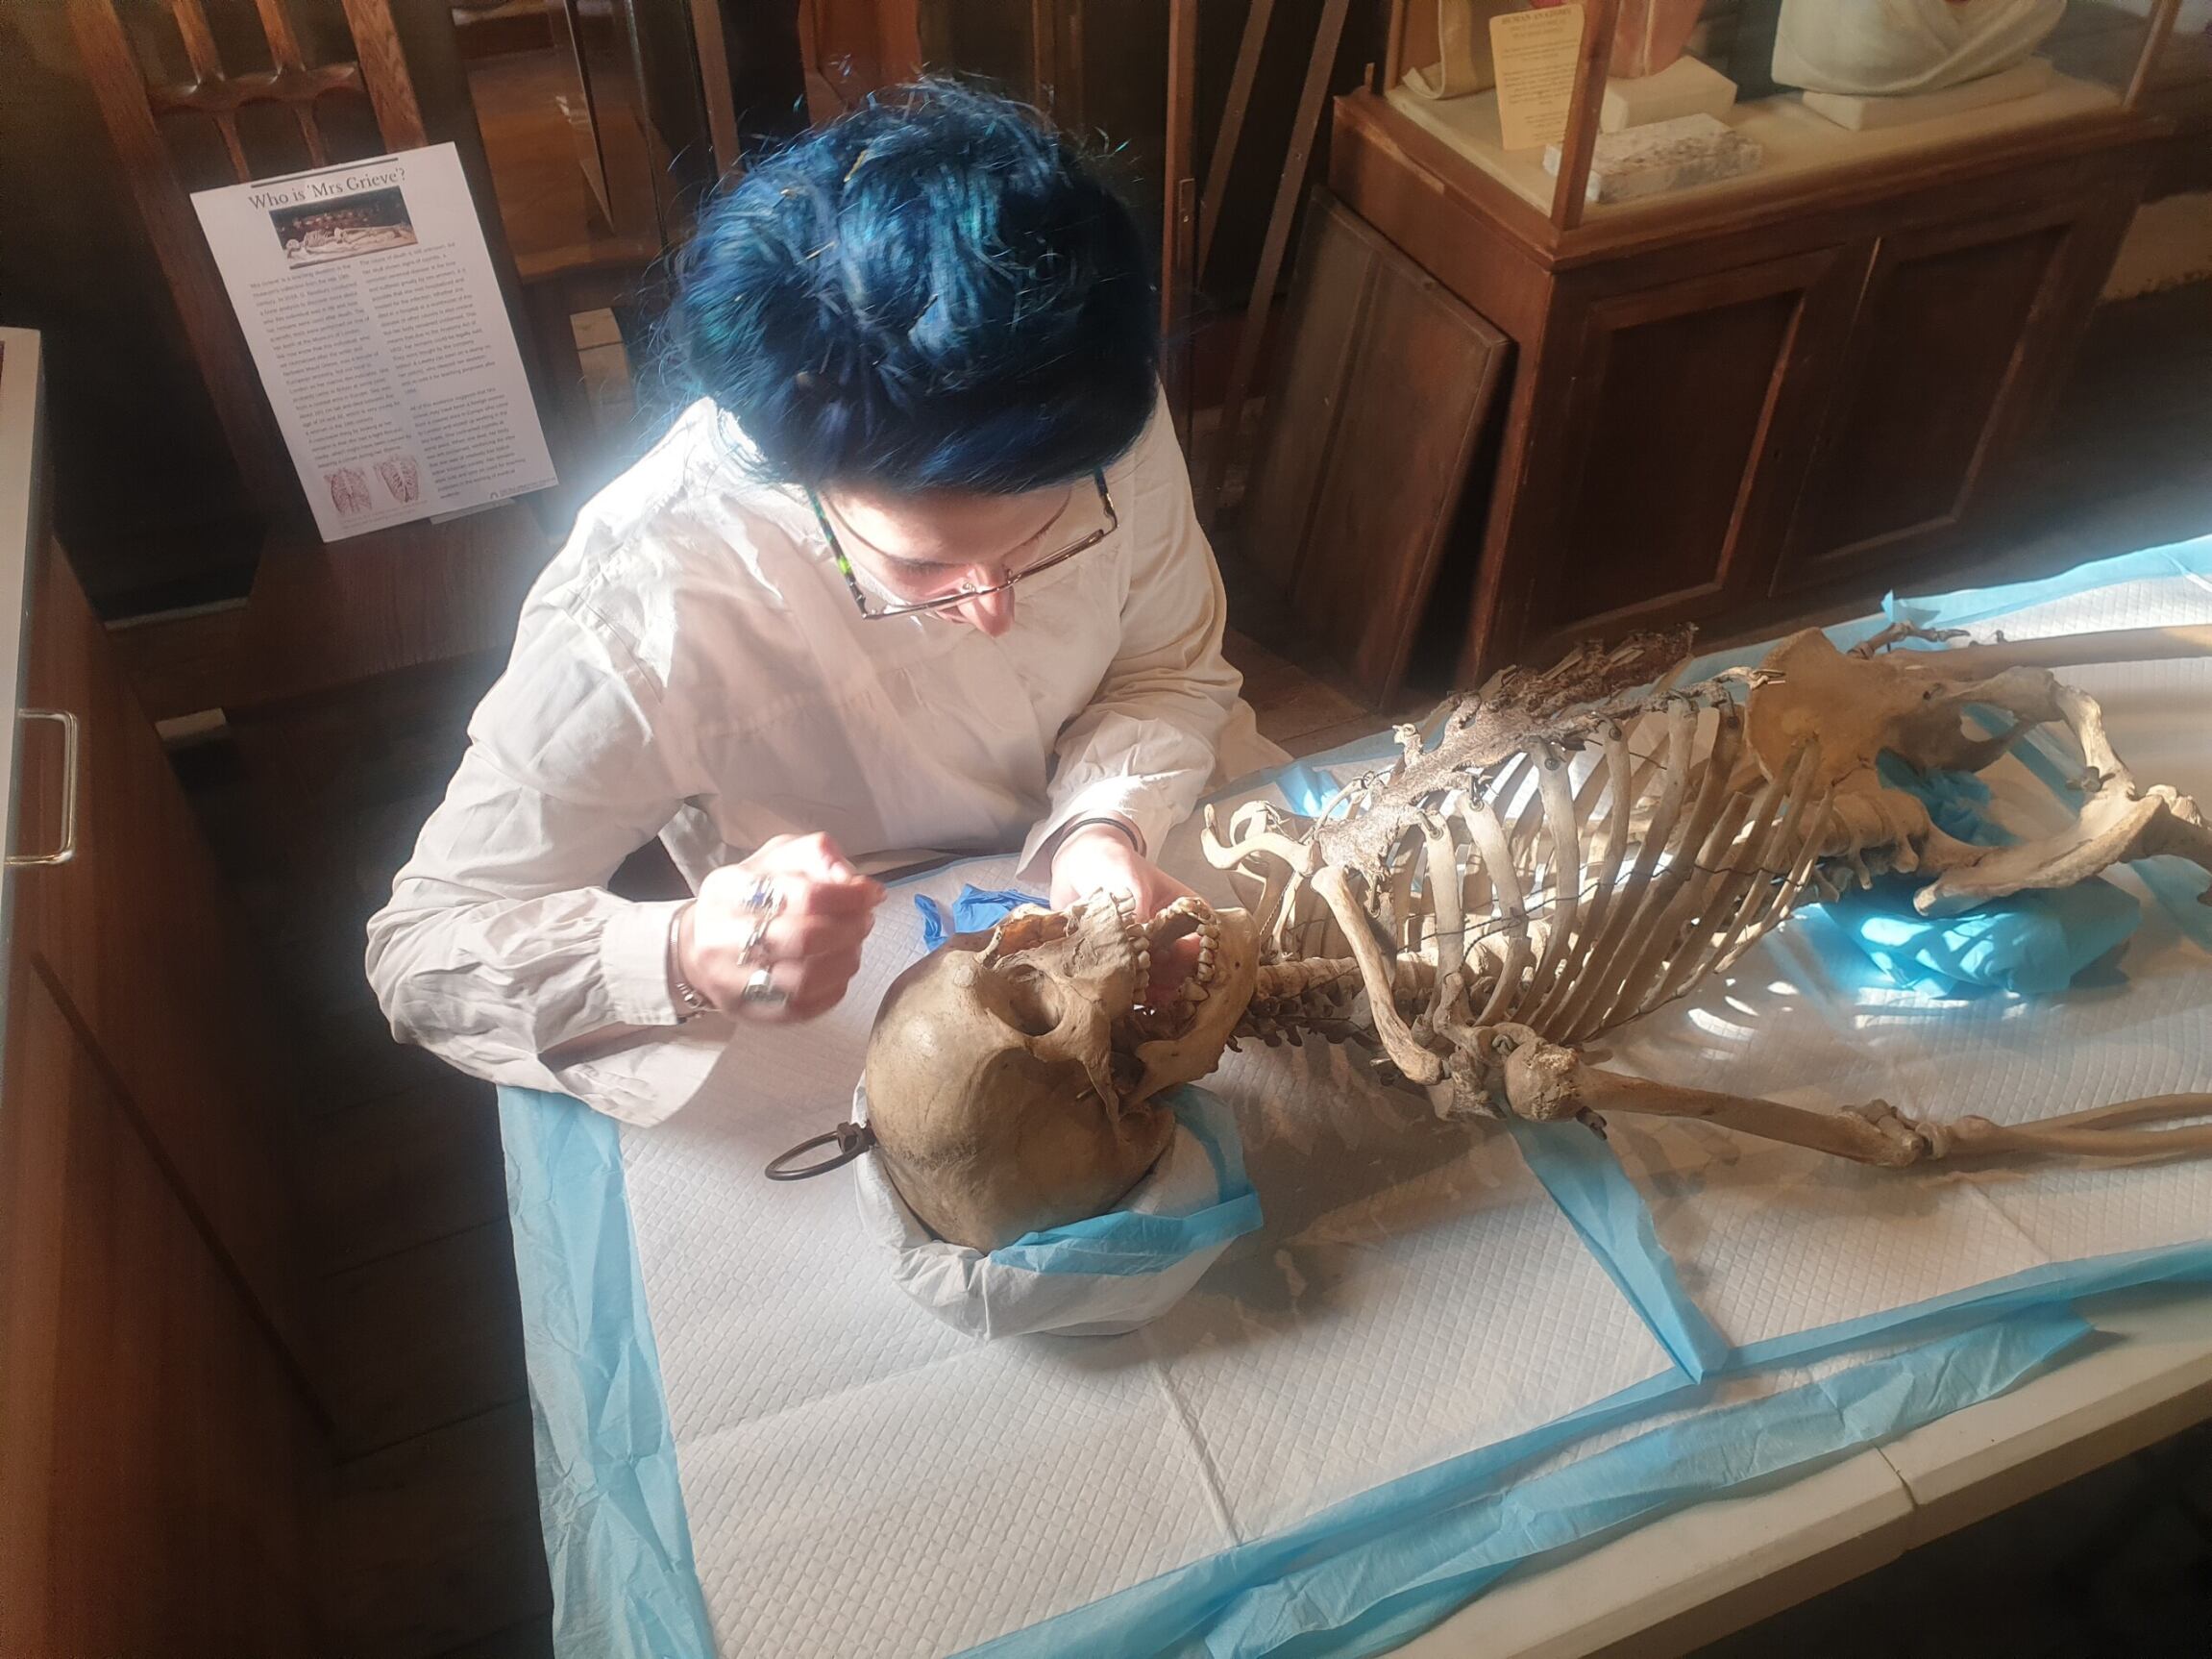 A woman with blue hair and wearing a white coat examines a skeleton, lying flat on a covered table